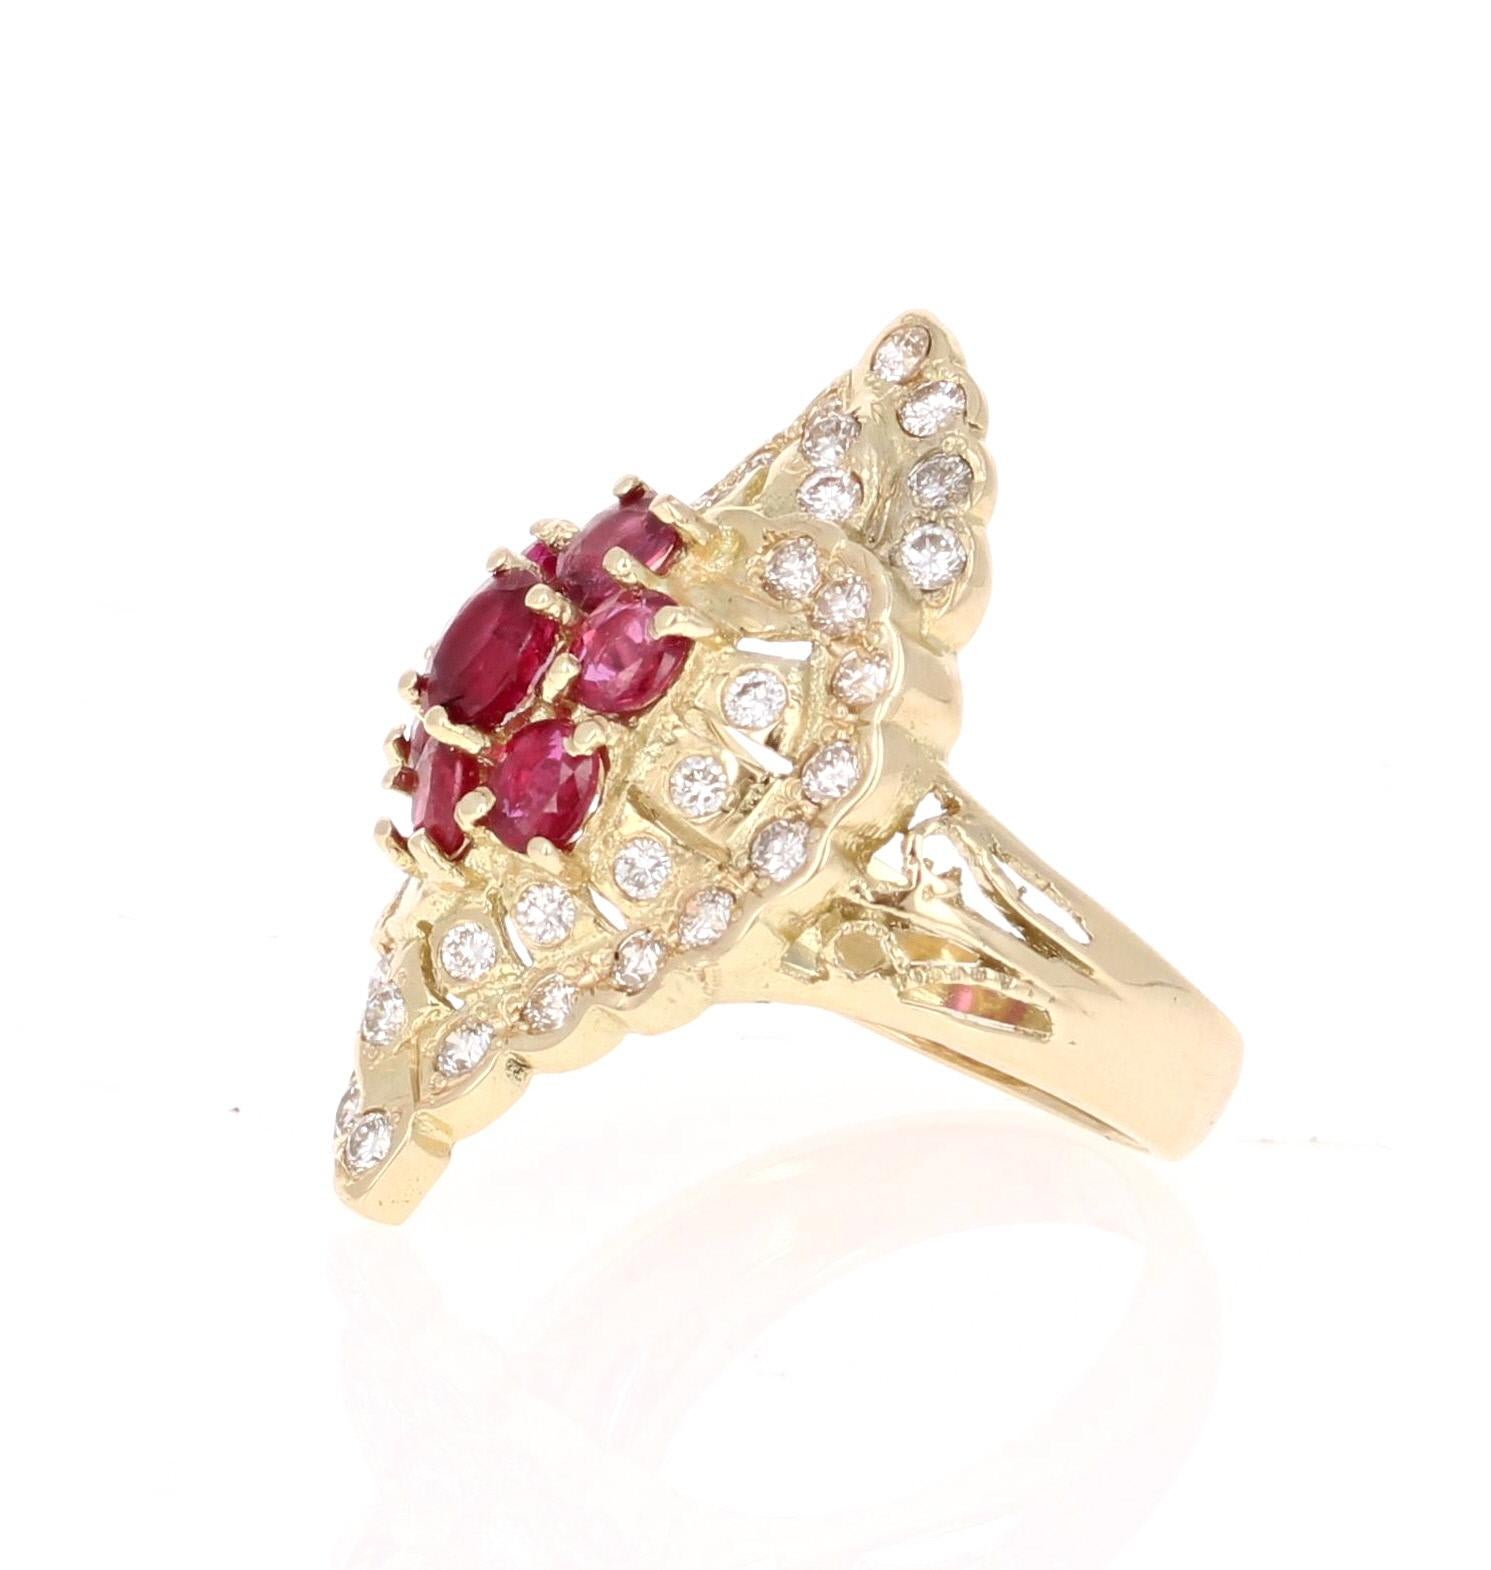 This Victorian-Inspired Ring is truly a unique vintage beauty! 

There are 7 Oval Cut Burmese Rubies clustered into a flower like design in the center of the ring that weigh 1.46 carats. There are also 40 Round Cut Diamonds that weigh 0.90 carat